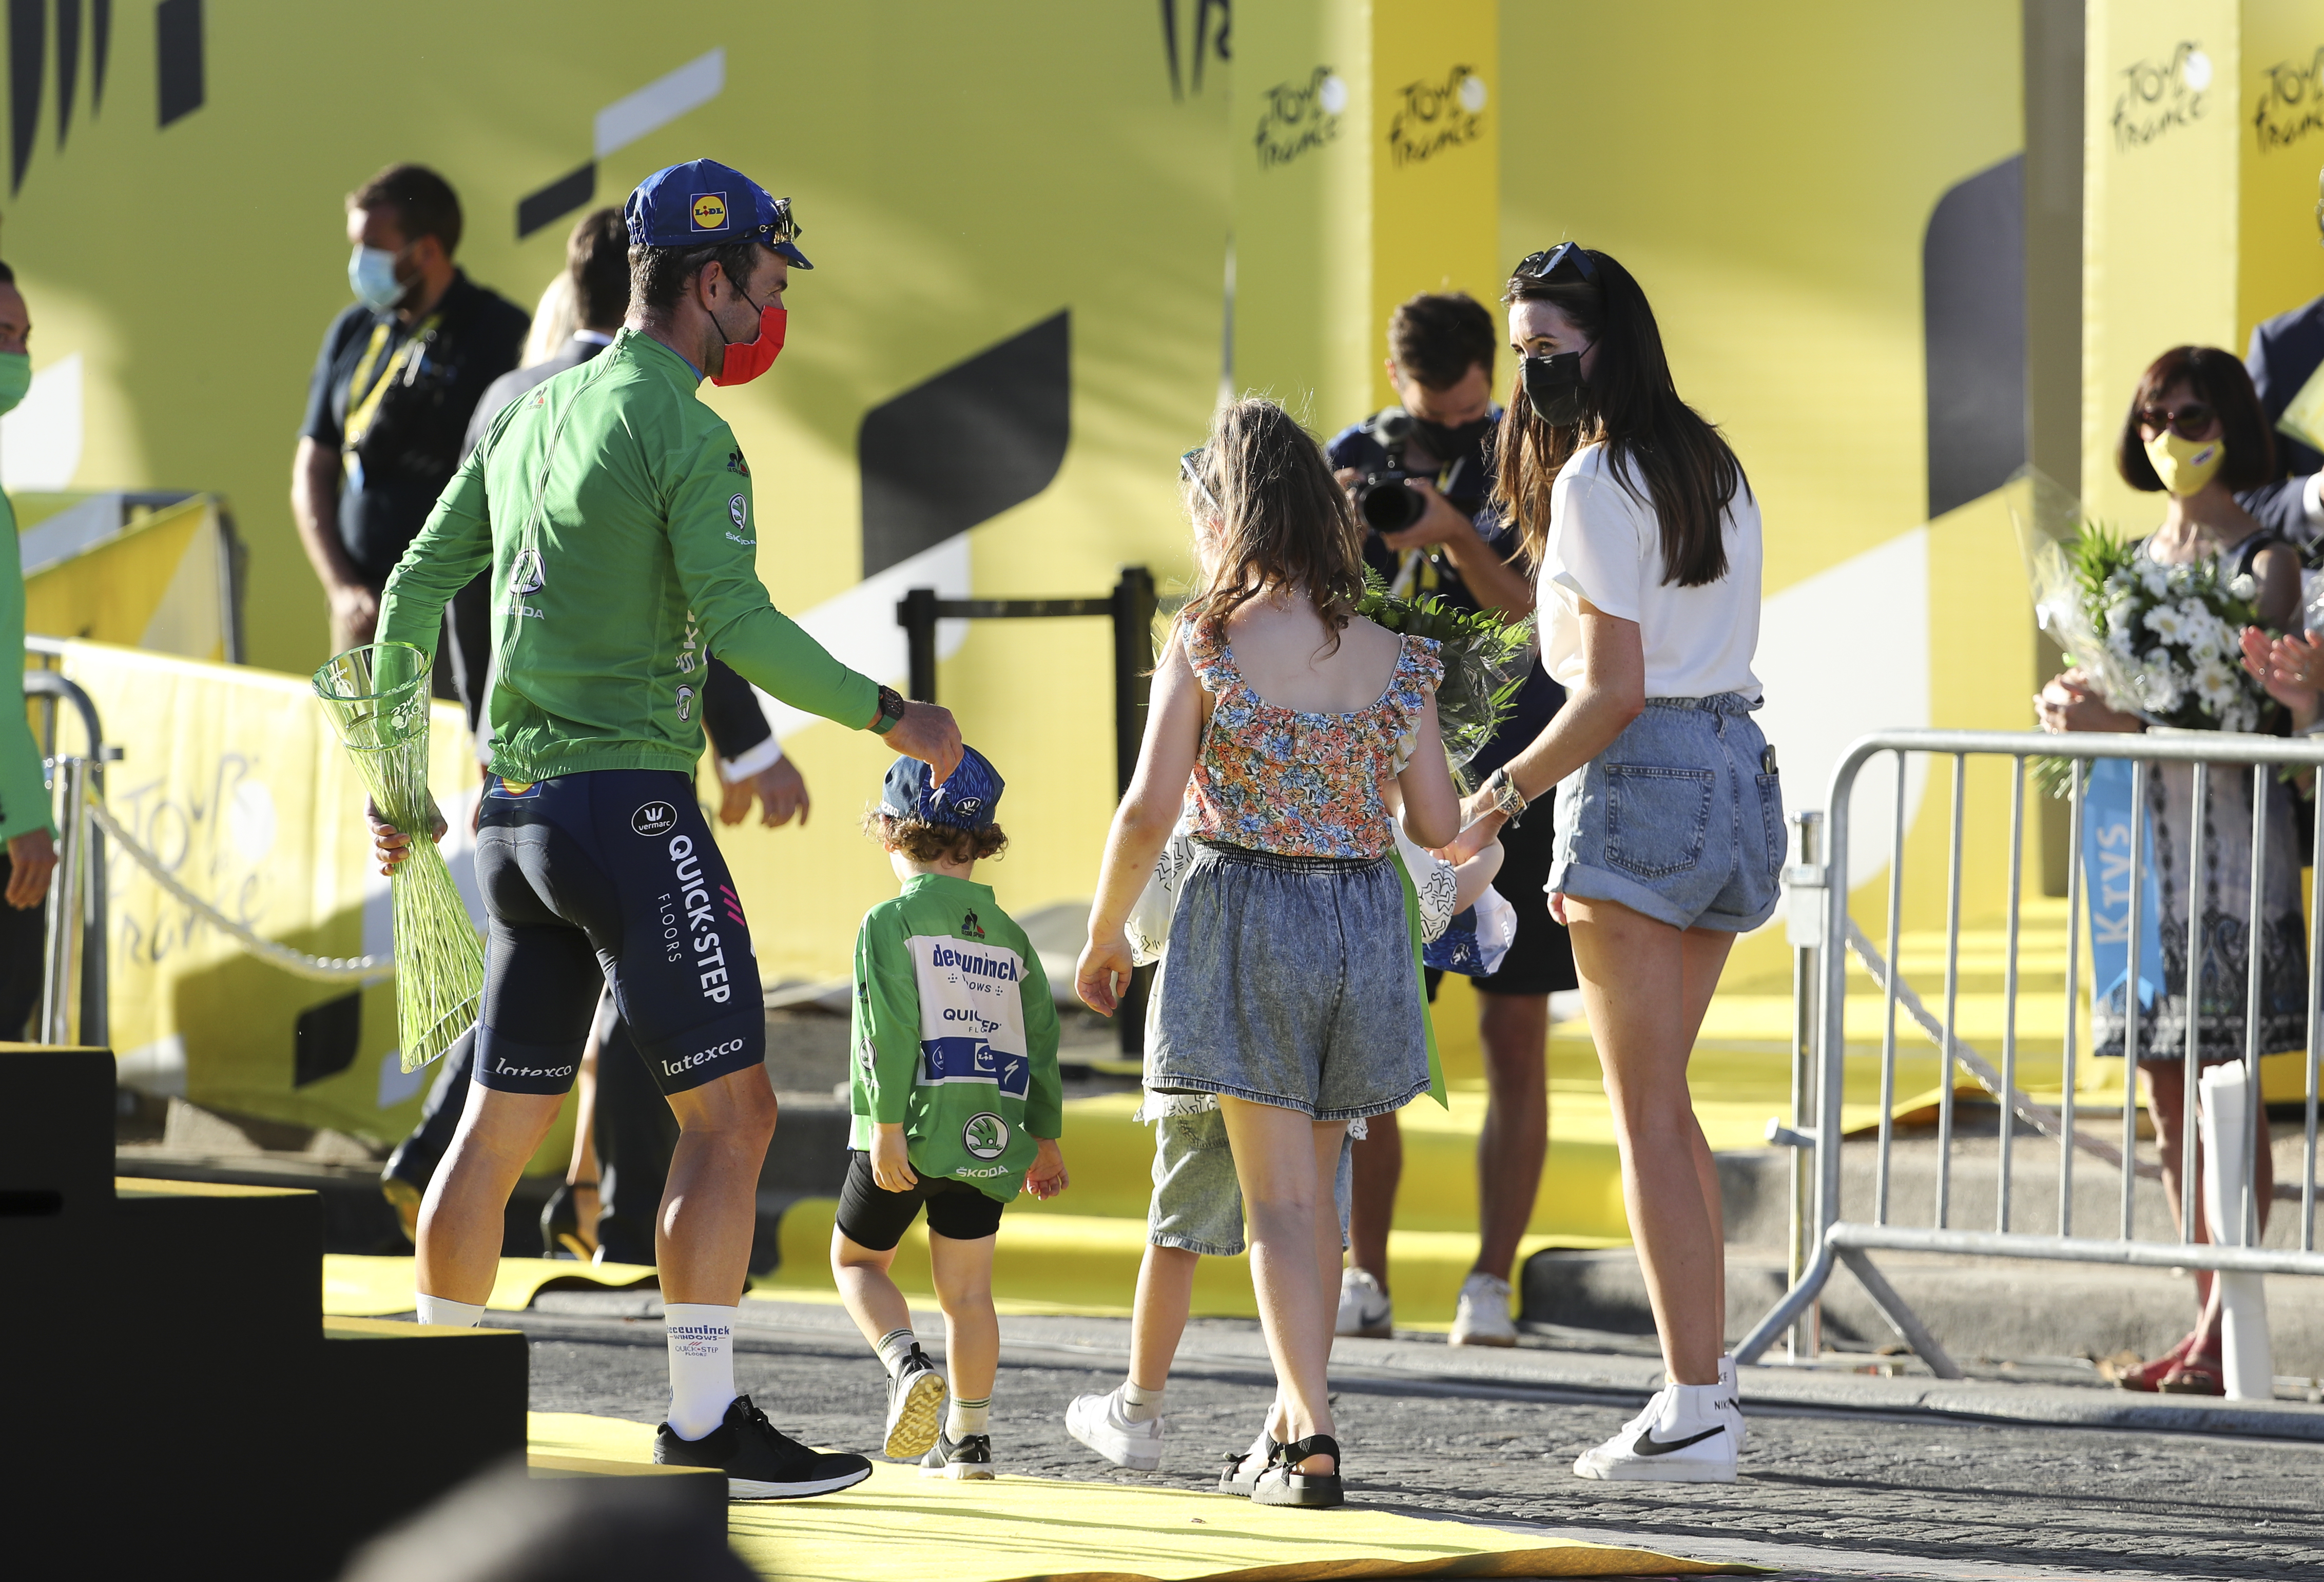 Mark Cavendish and family at Tour de France 2021